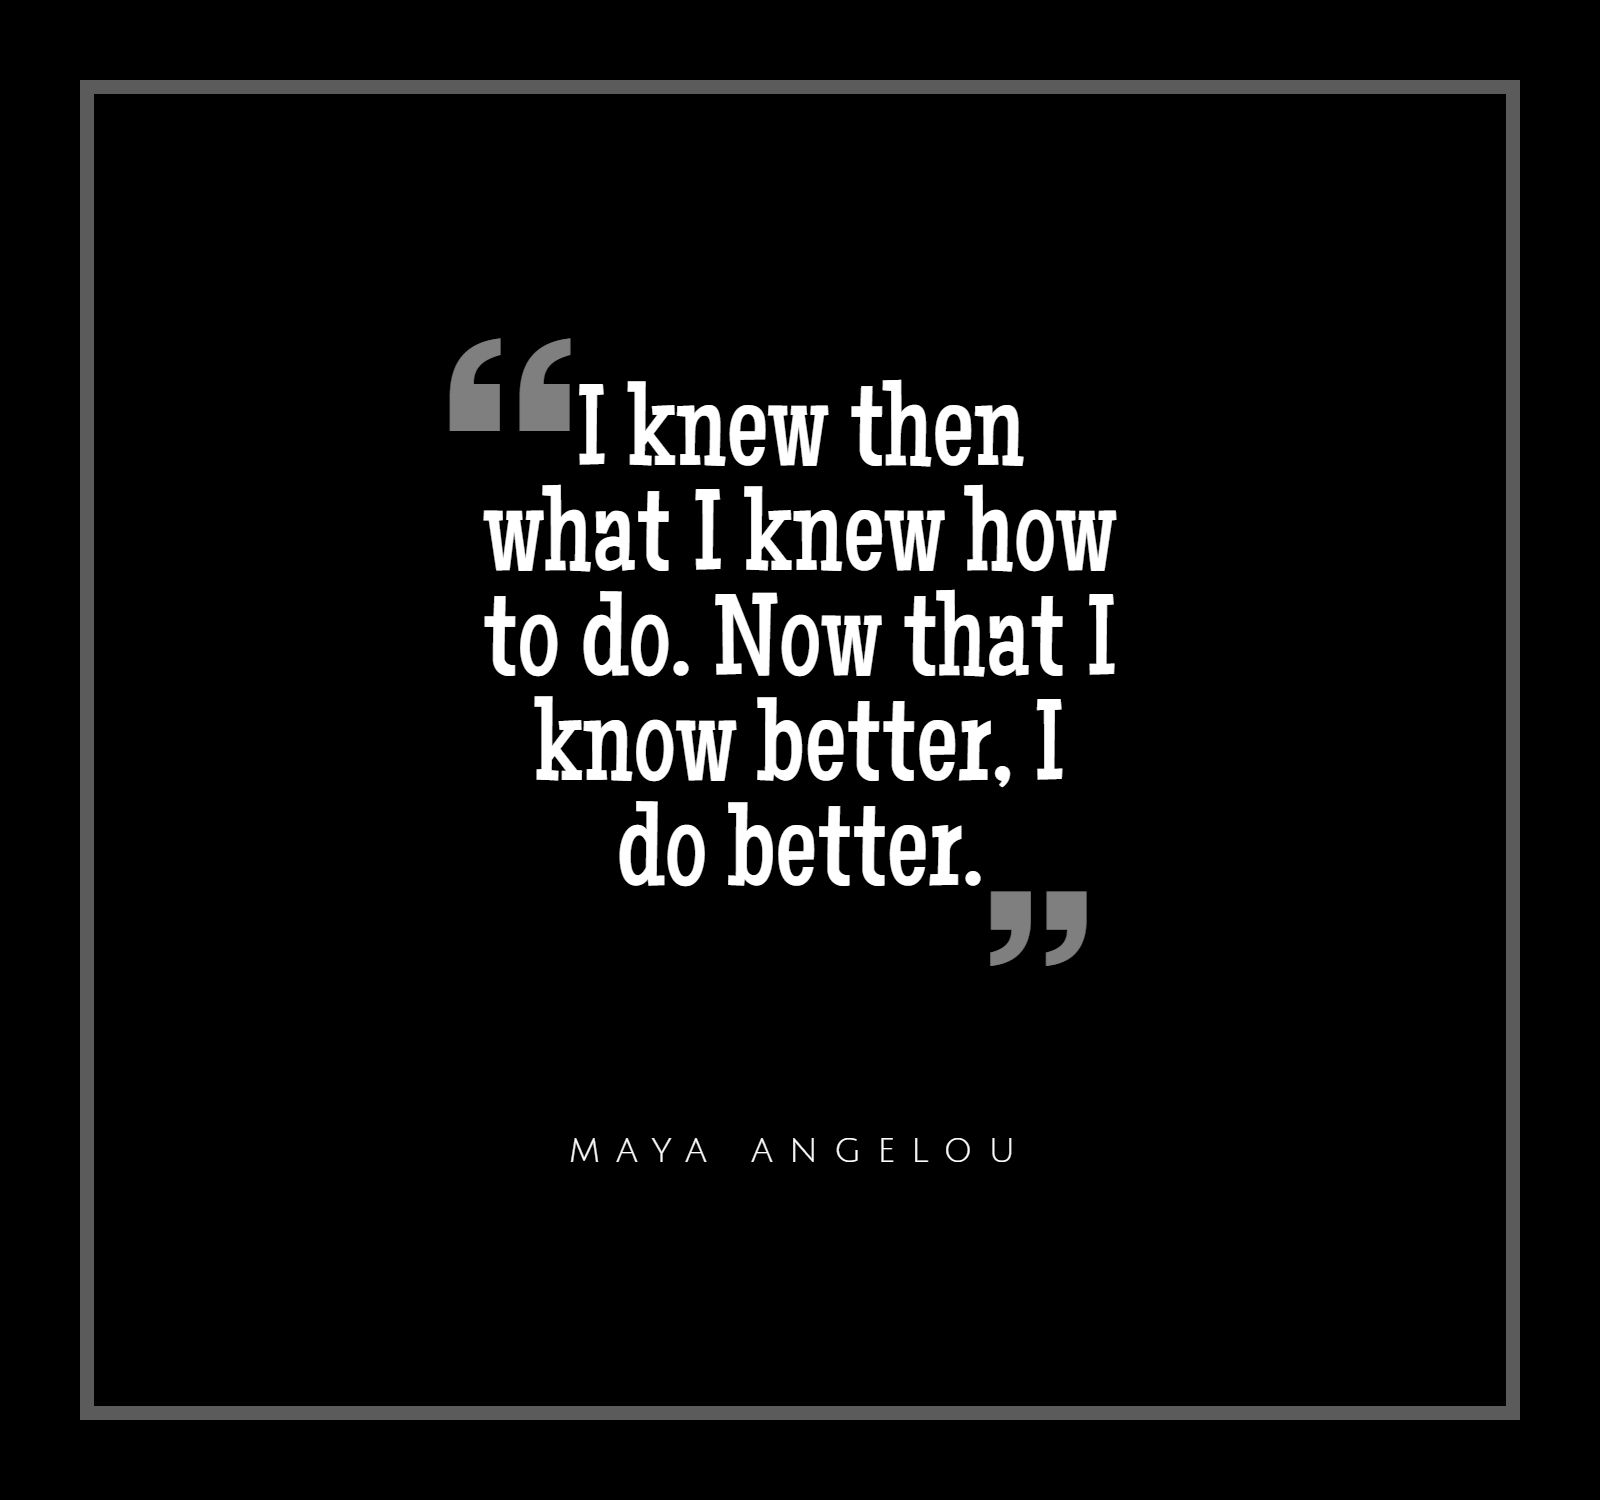 "I knew then what I knew how to do. Now that I know better, I do better." Maya Angelou